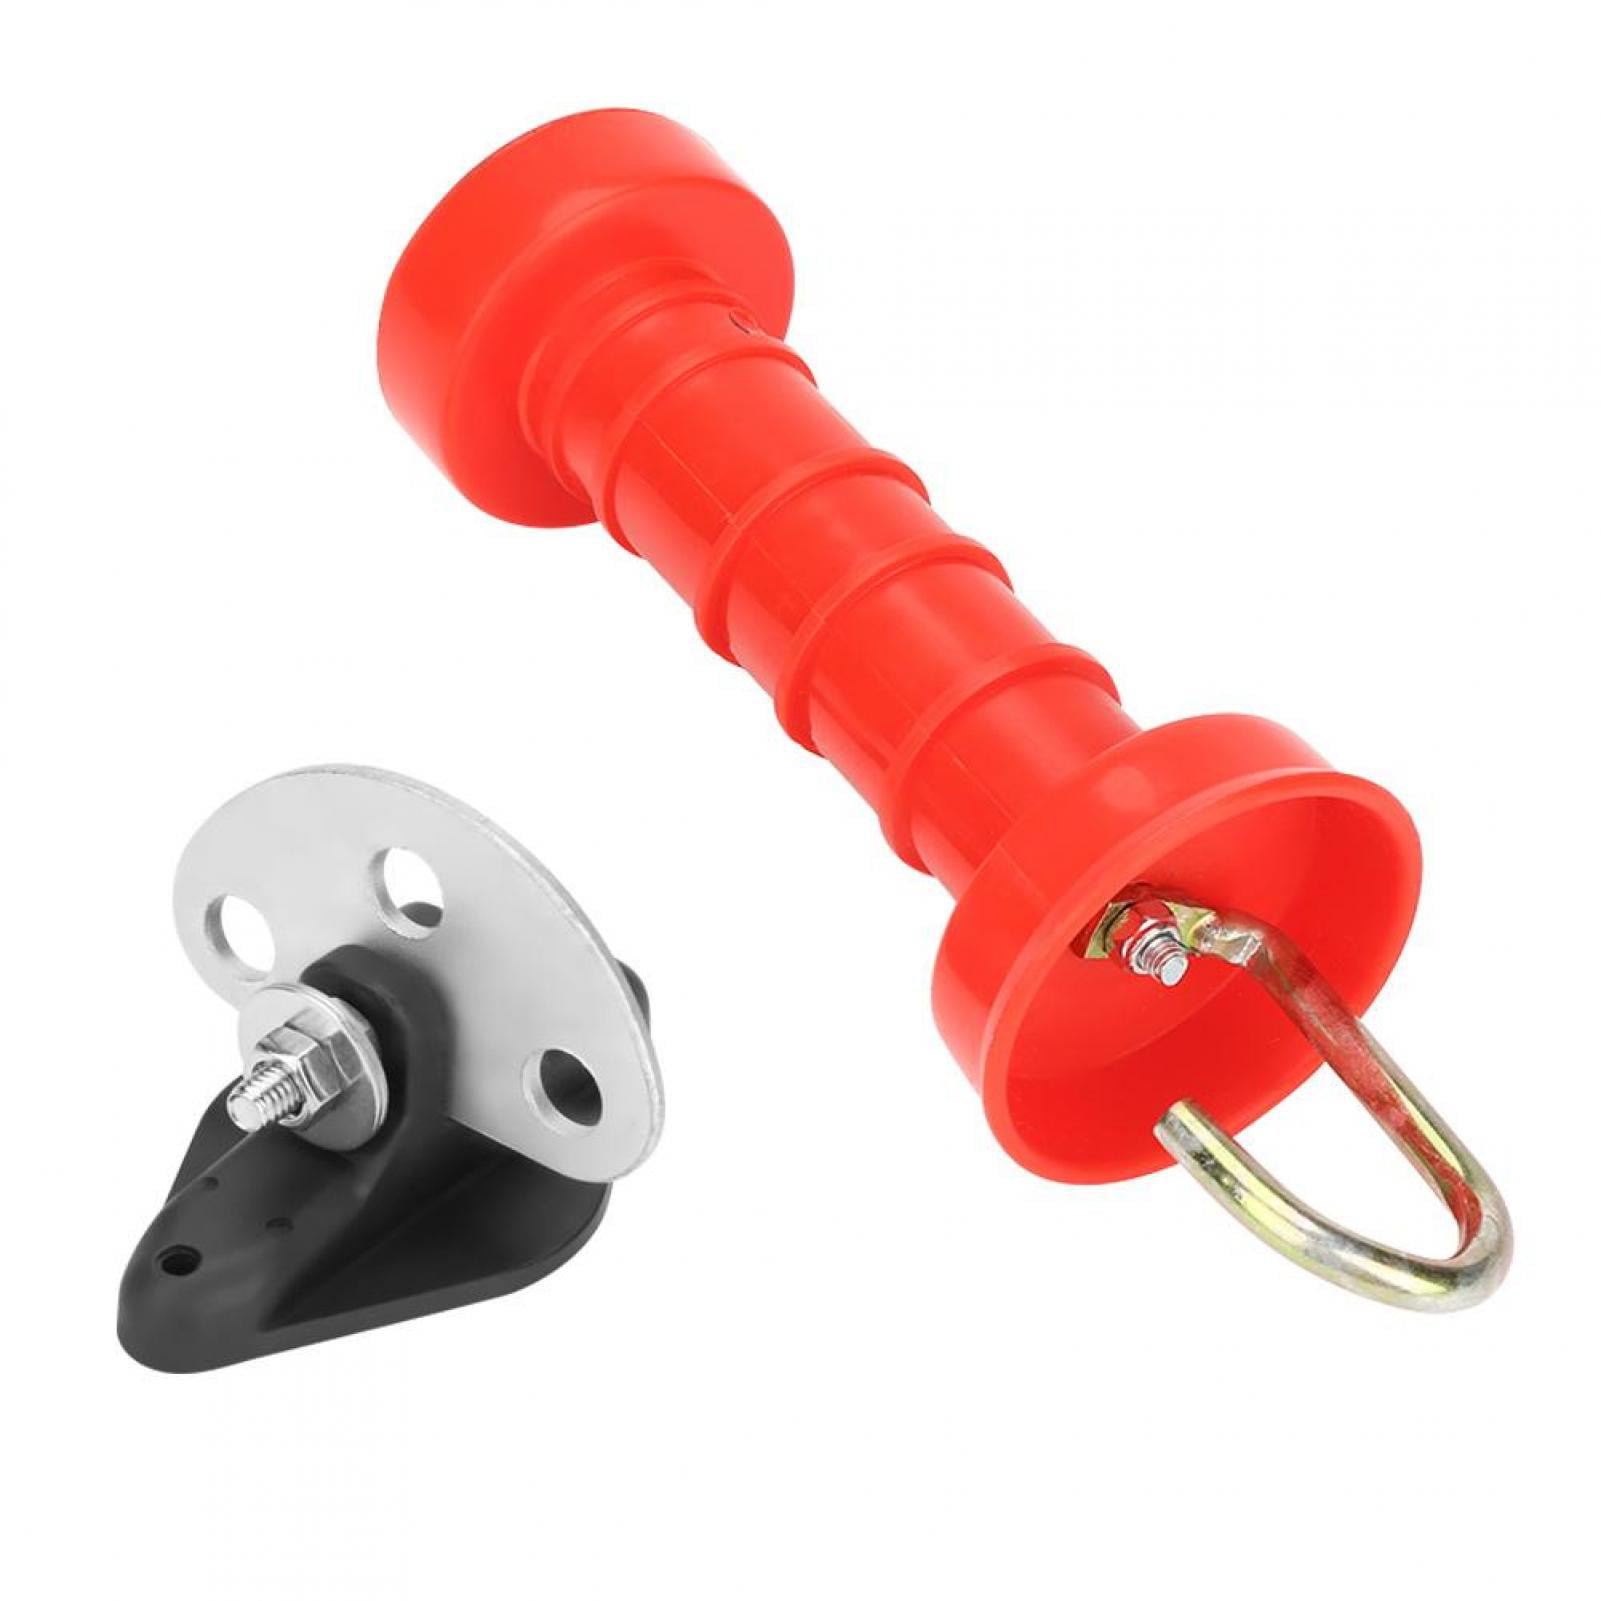 10pcs Insulated Spring Gate Handles With 10 Pcs Insulators For Electric Fence US 